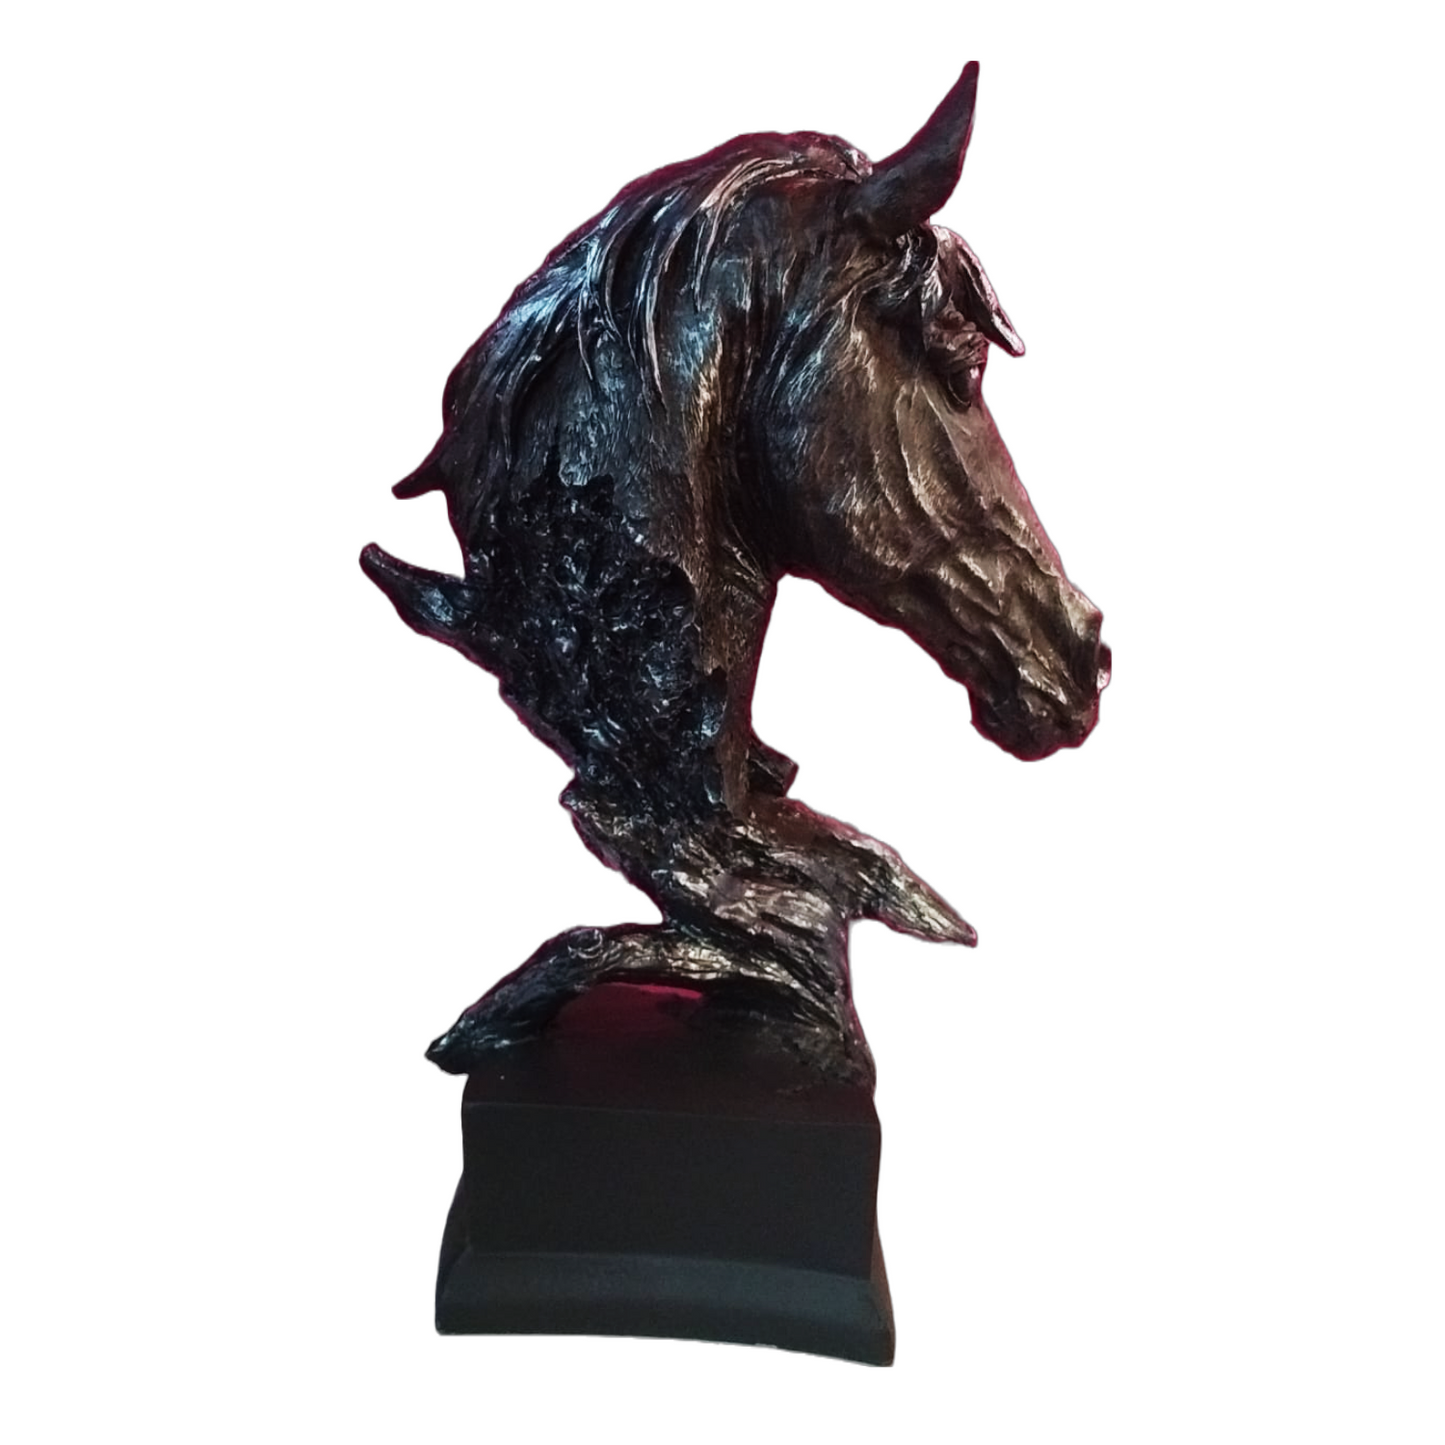 Statue ALiLA Horse Face Statue Idol Showpiece for Home Living Room Decoration & Gifting, 15 inches Height Statue